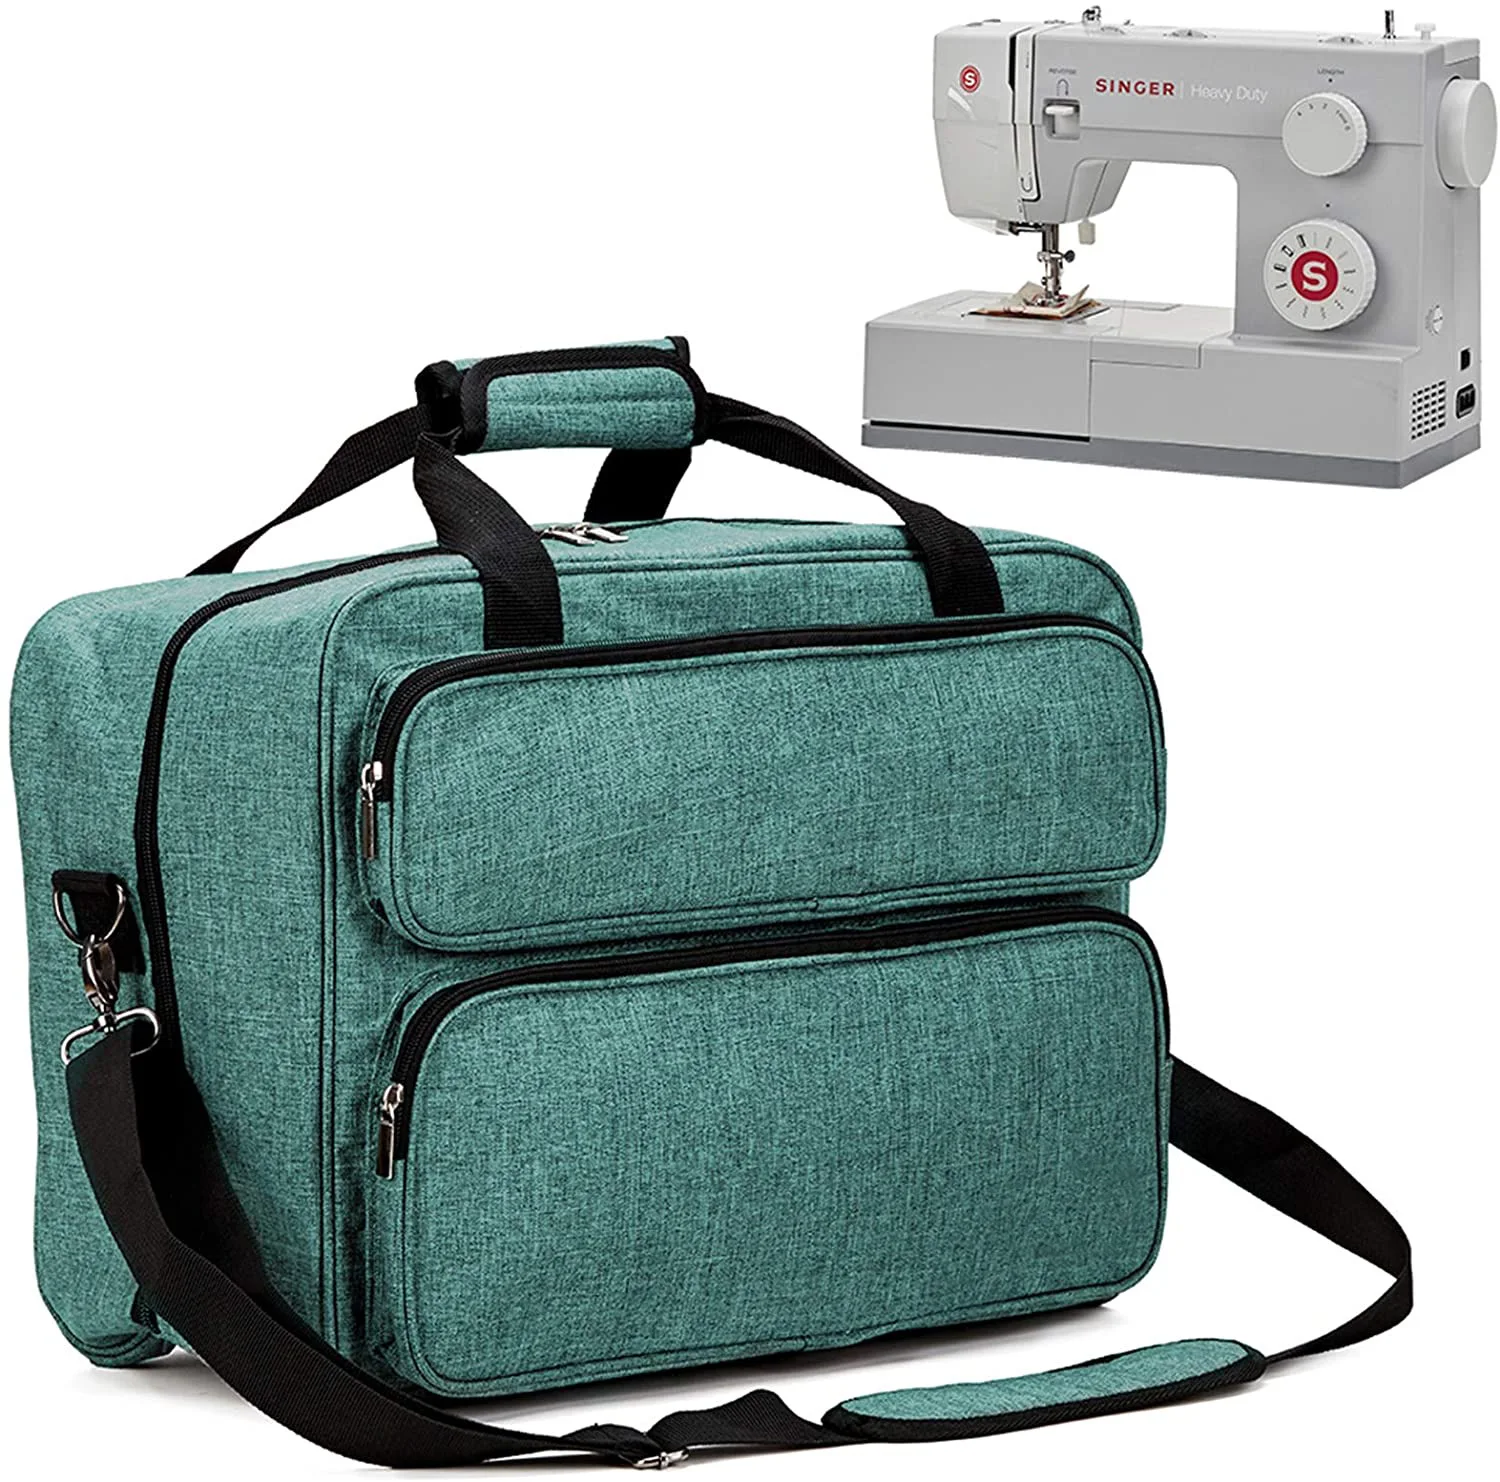 Xgood Sewing Machine Carrying Bag Sewing Machine Carrying Case with Shoulder Universal Tote Bags for Sewing Machines Accessories 